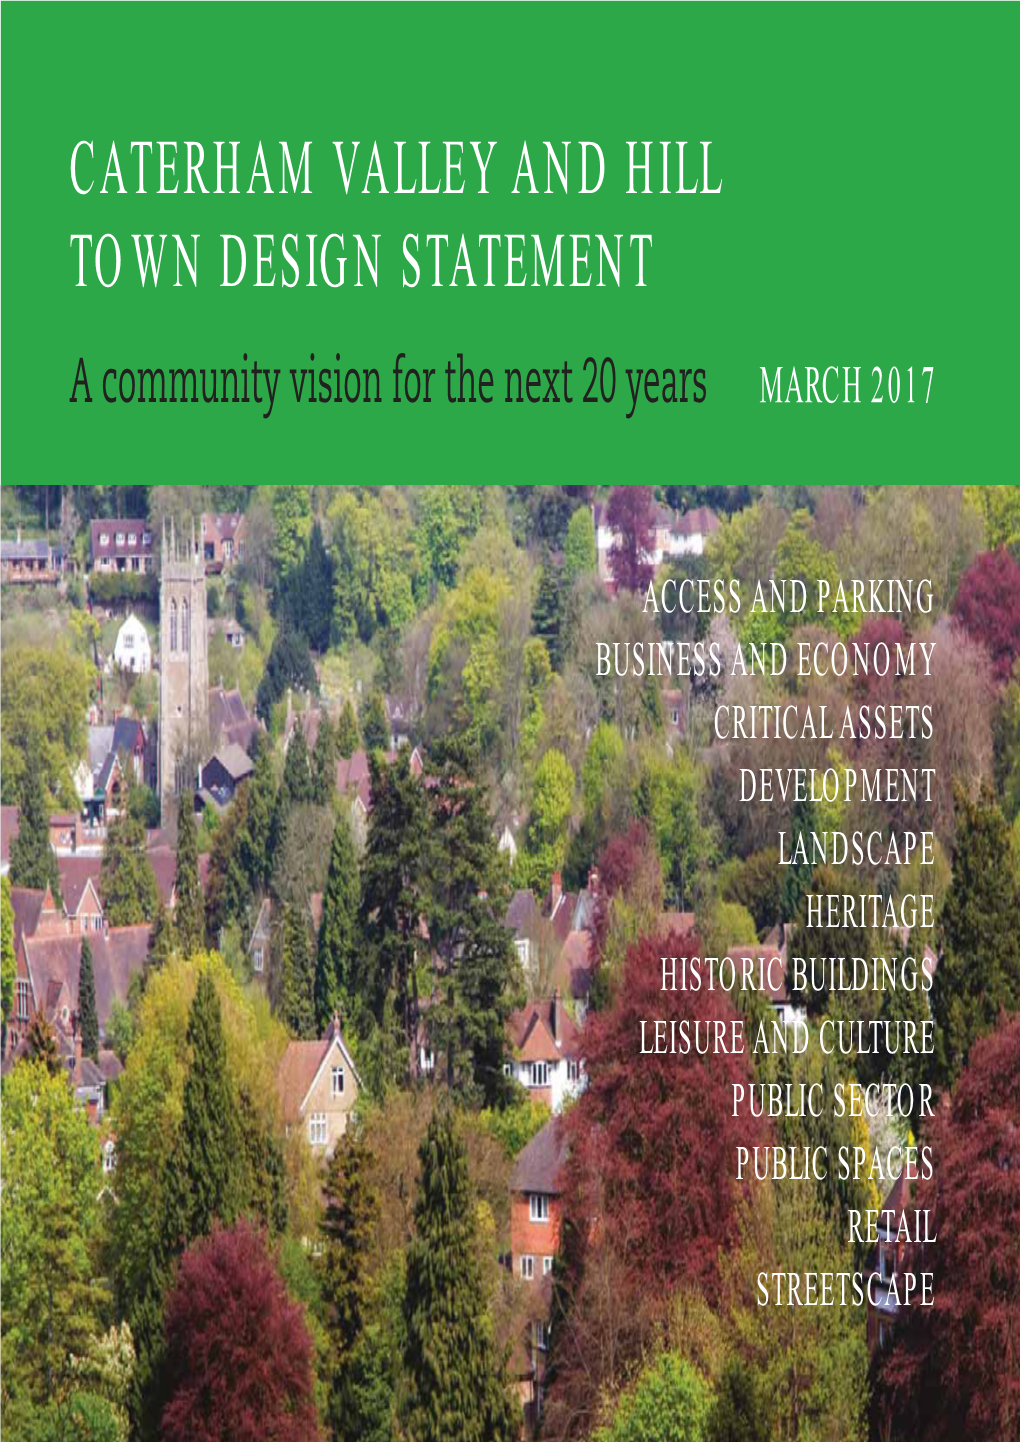 Caterham Valley and Hill Town Design Statement